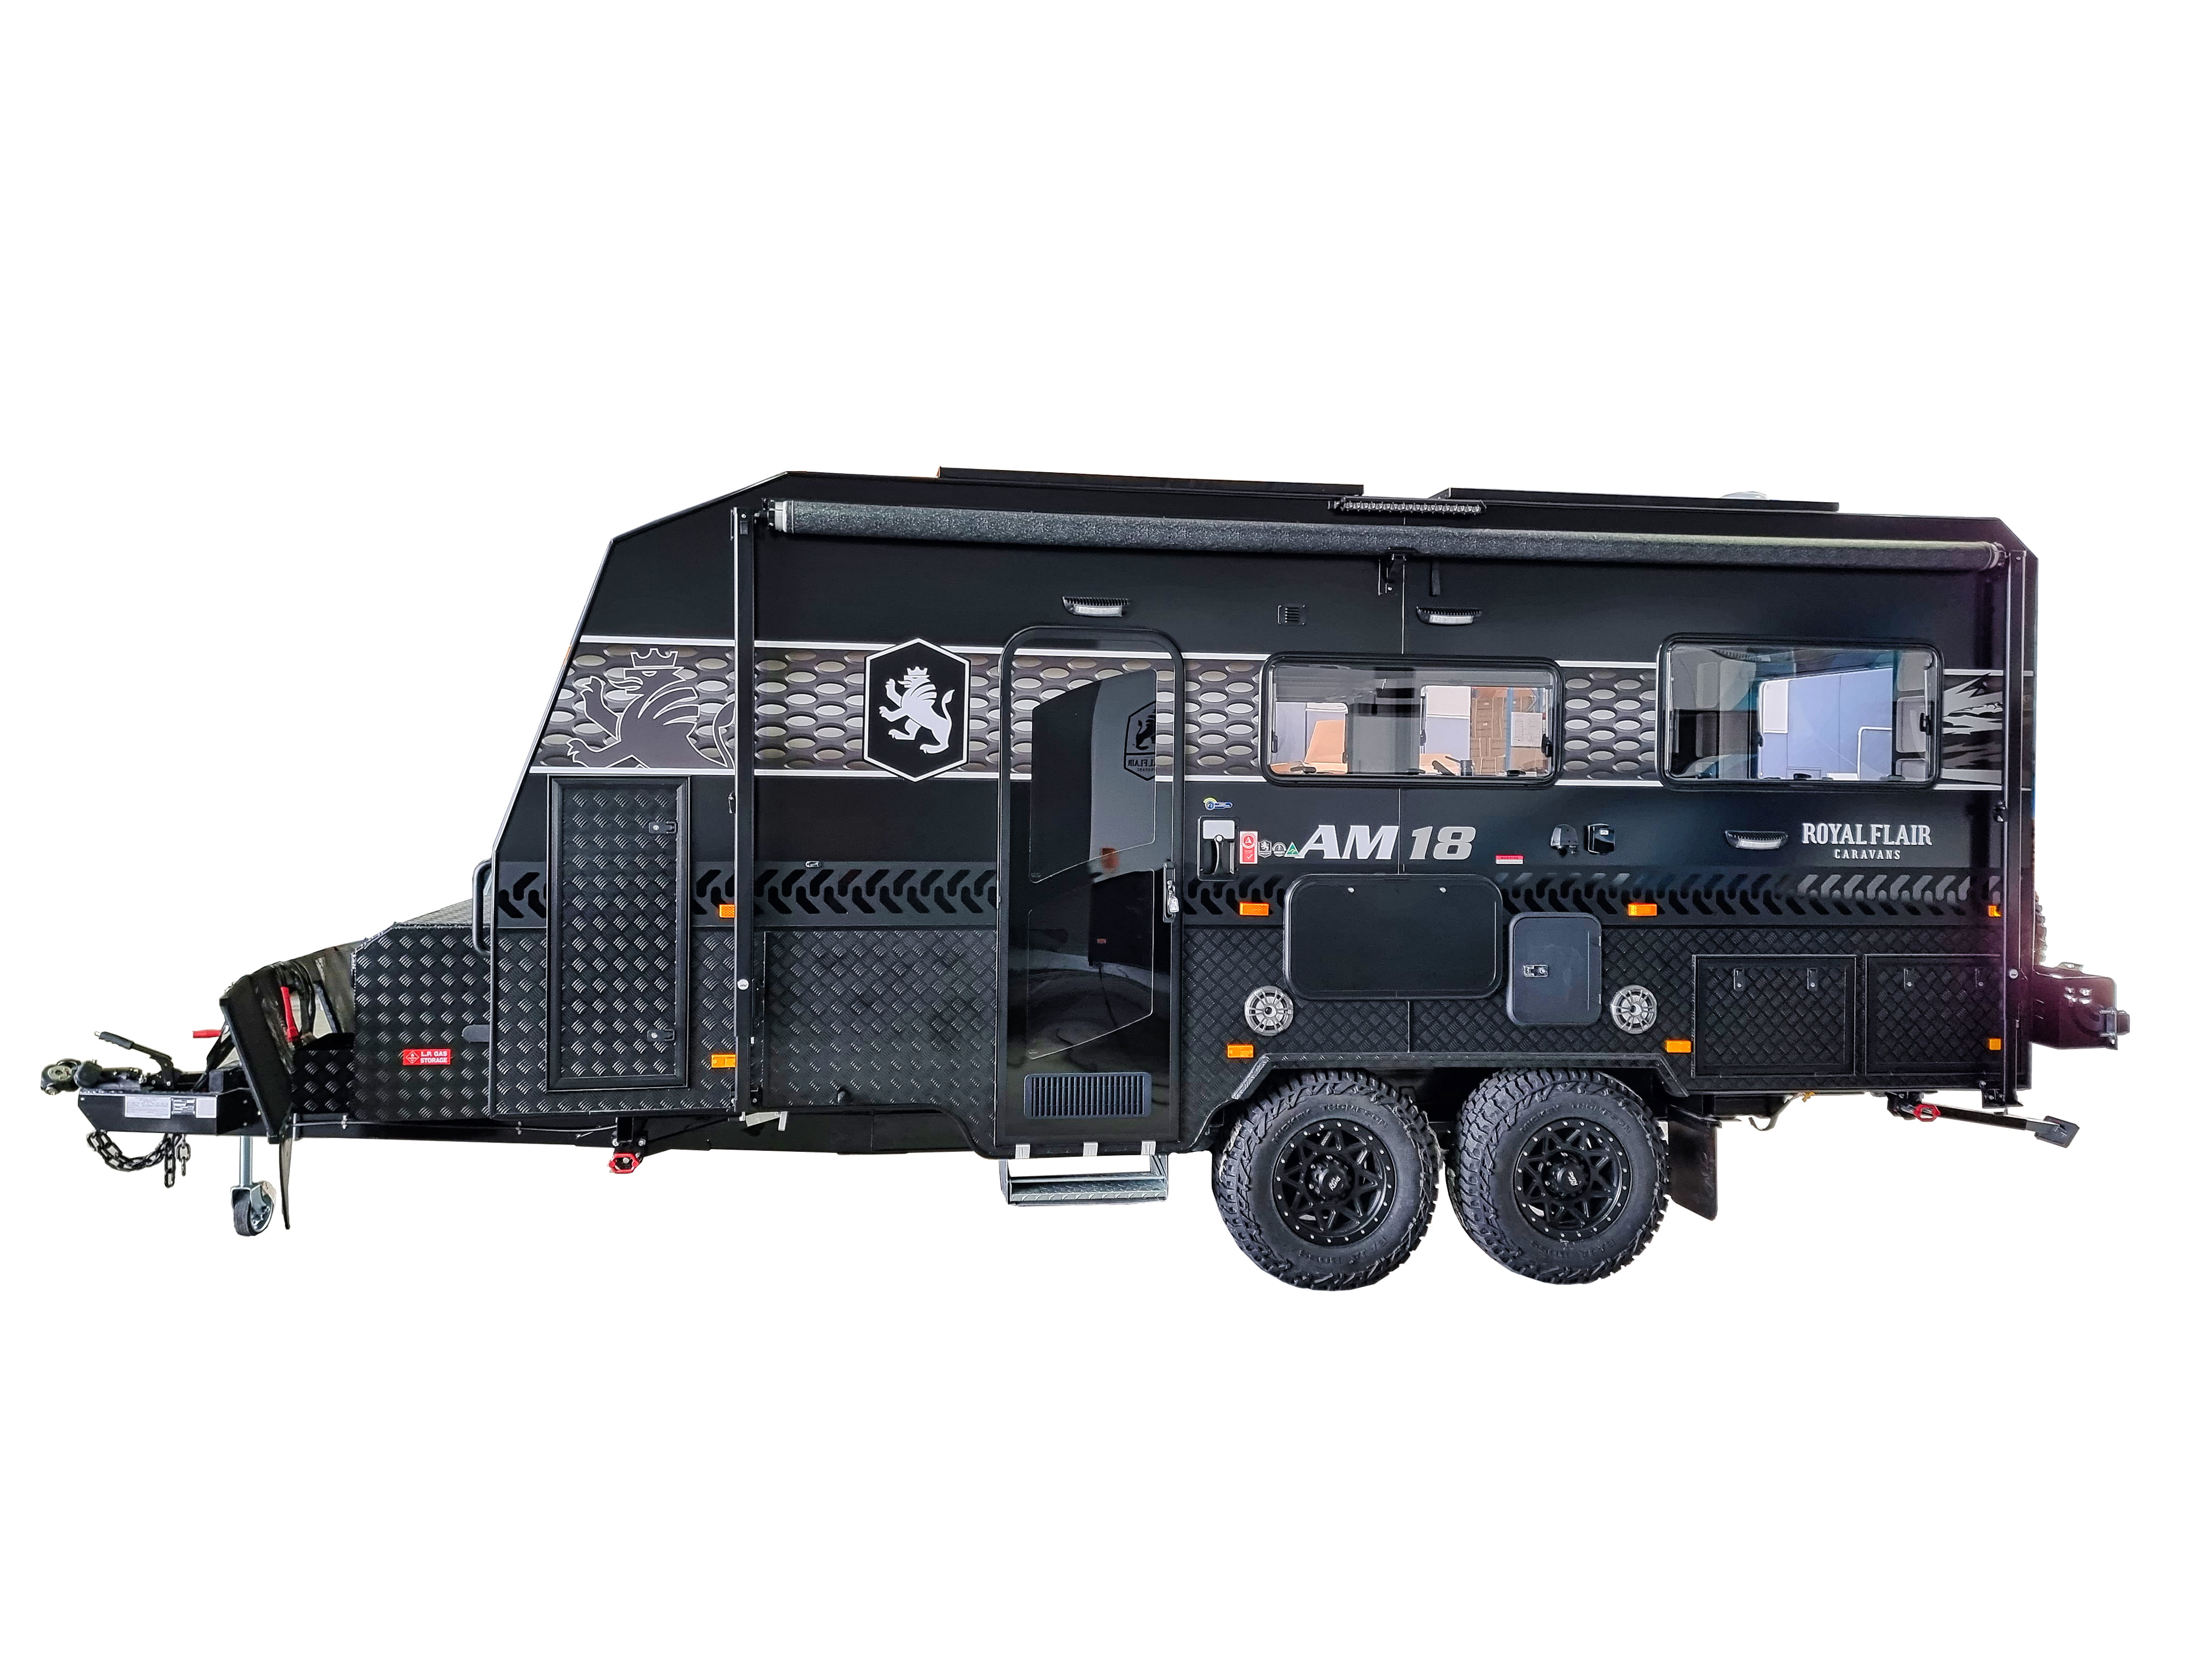 Black Aussiemate's Luxury Caravan: combining chic design with airbag suspension for a tranquil ride